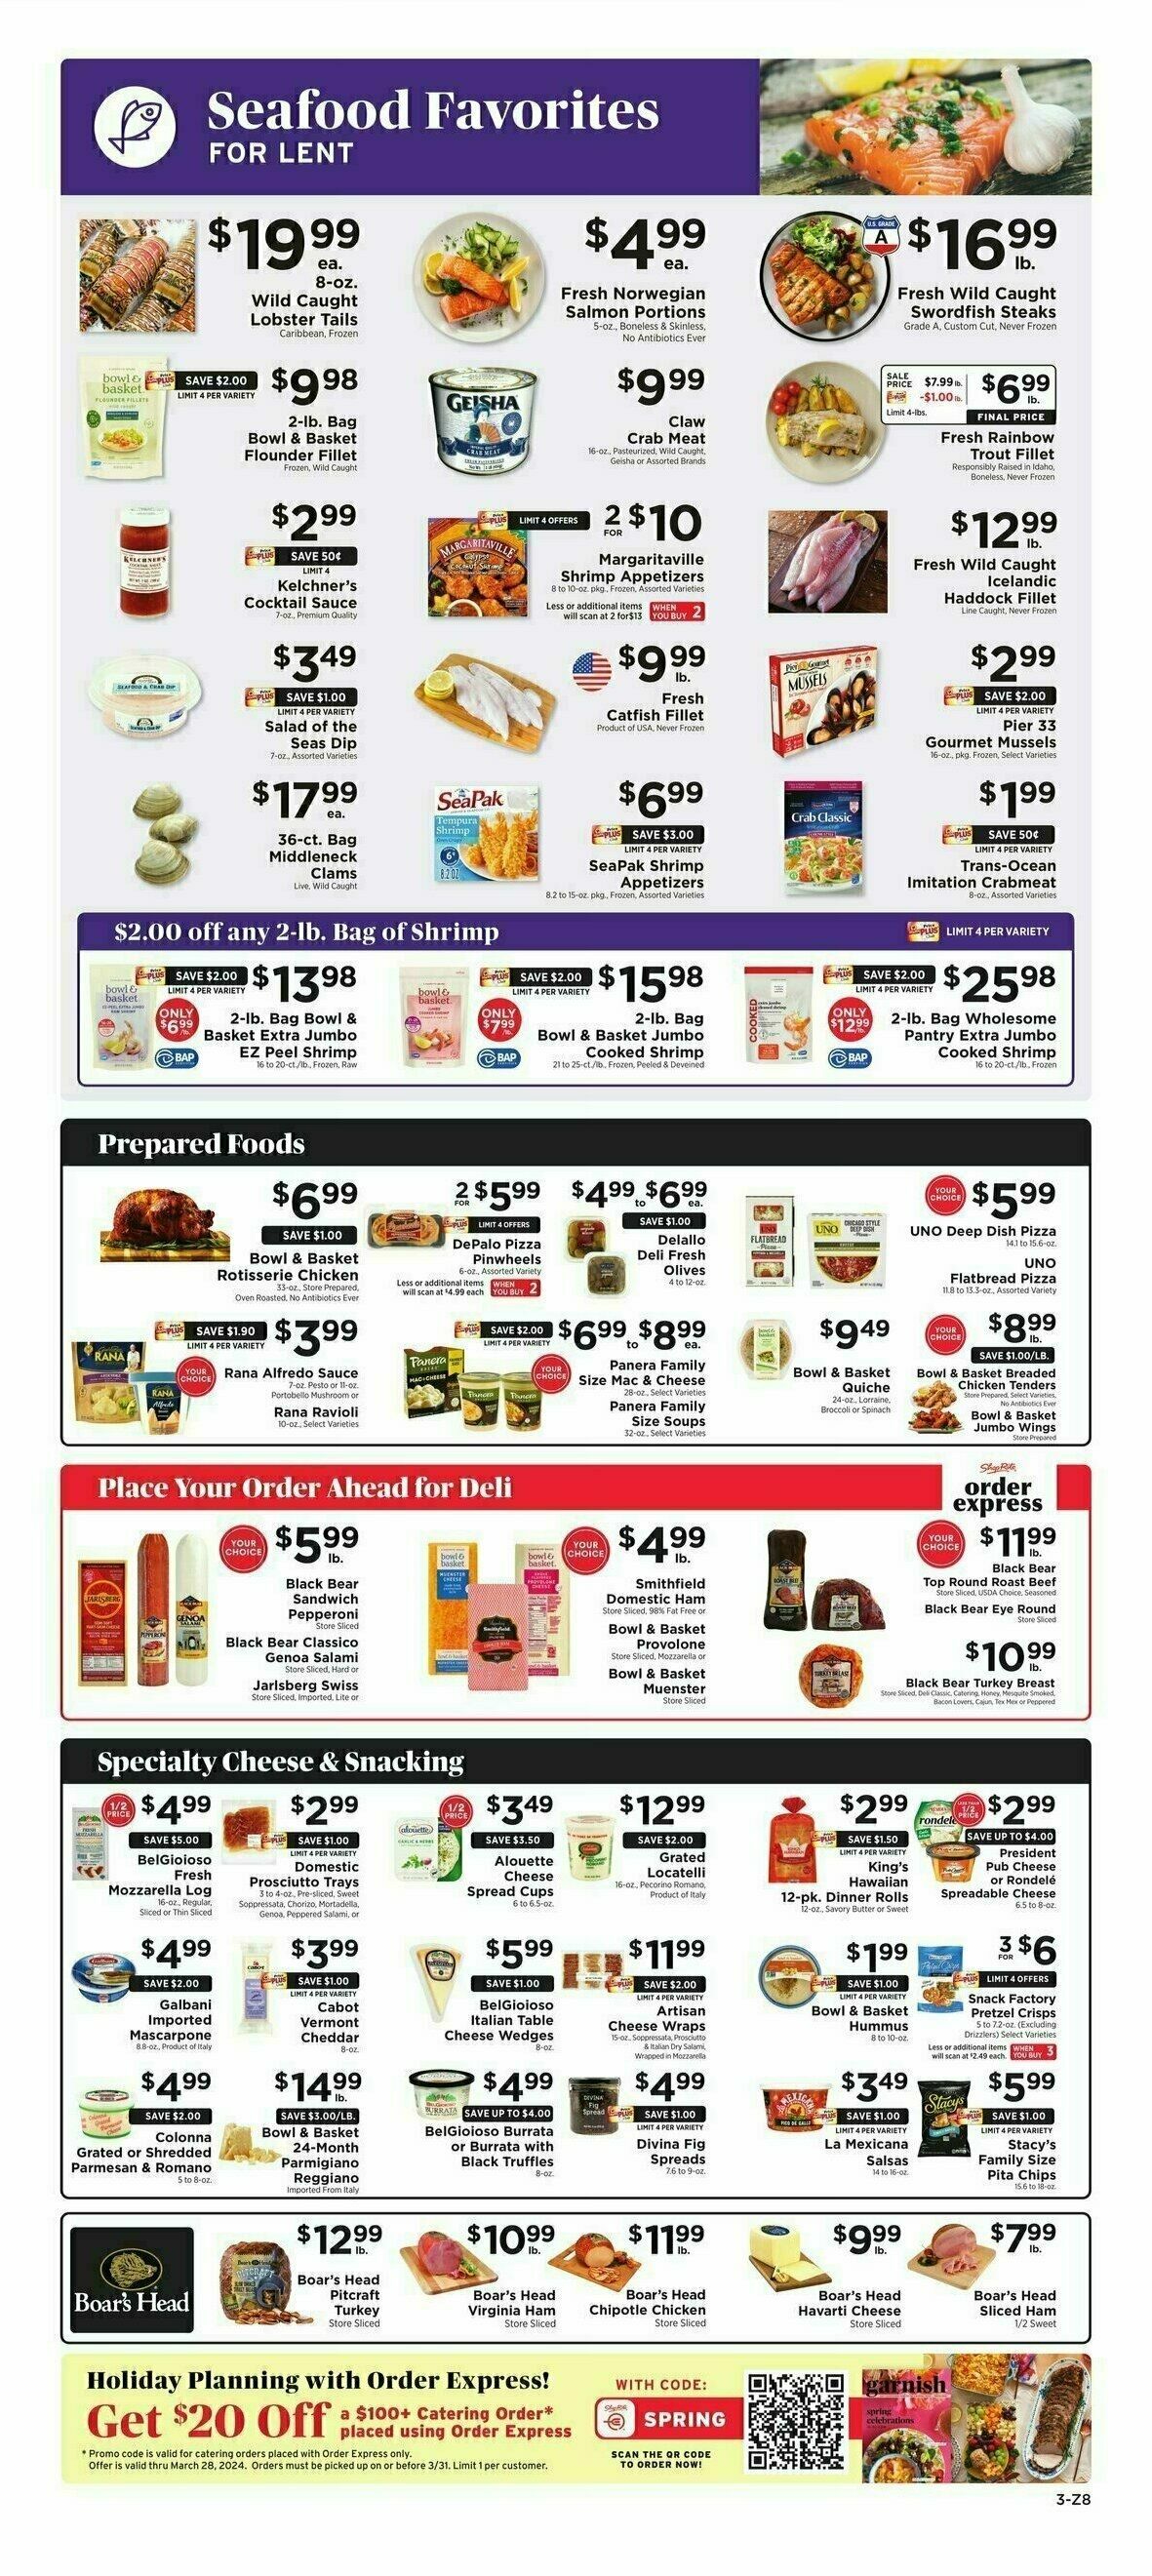 ShopRite Weekly Ad from March 22